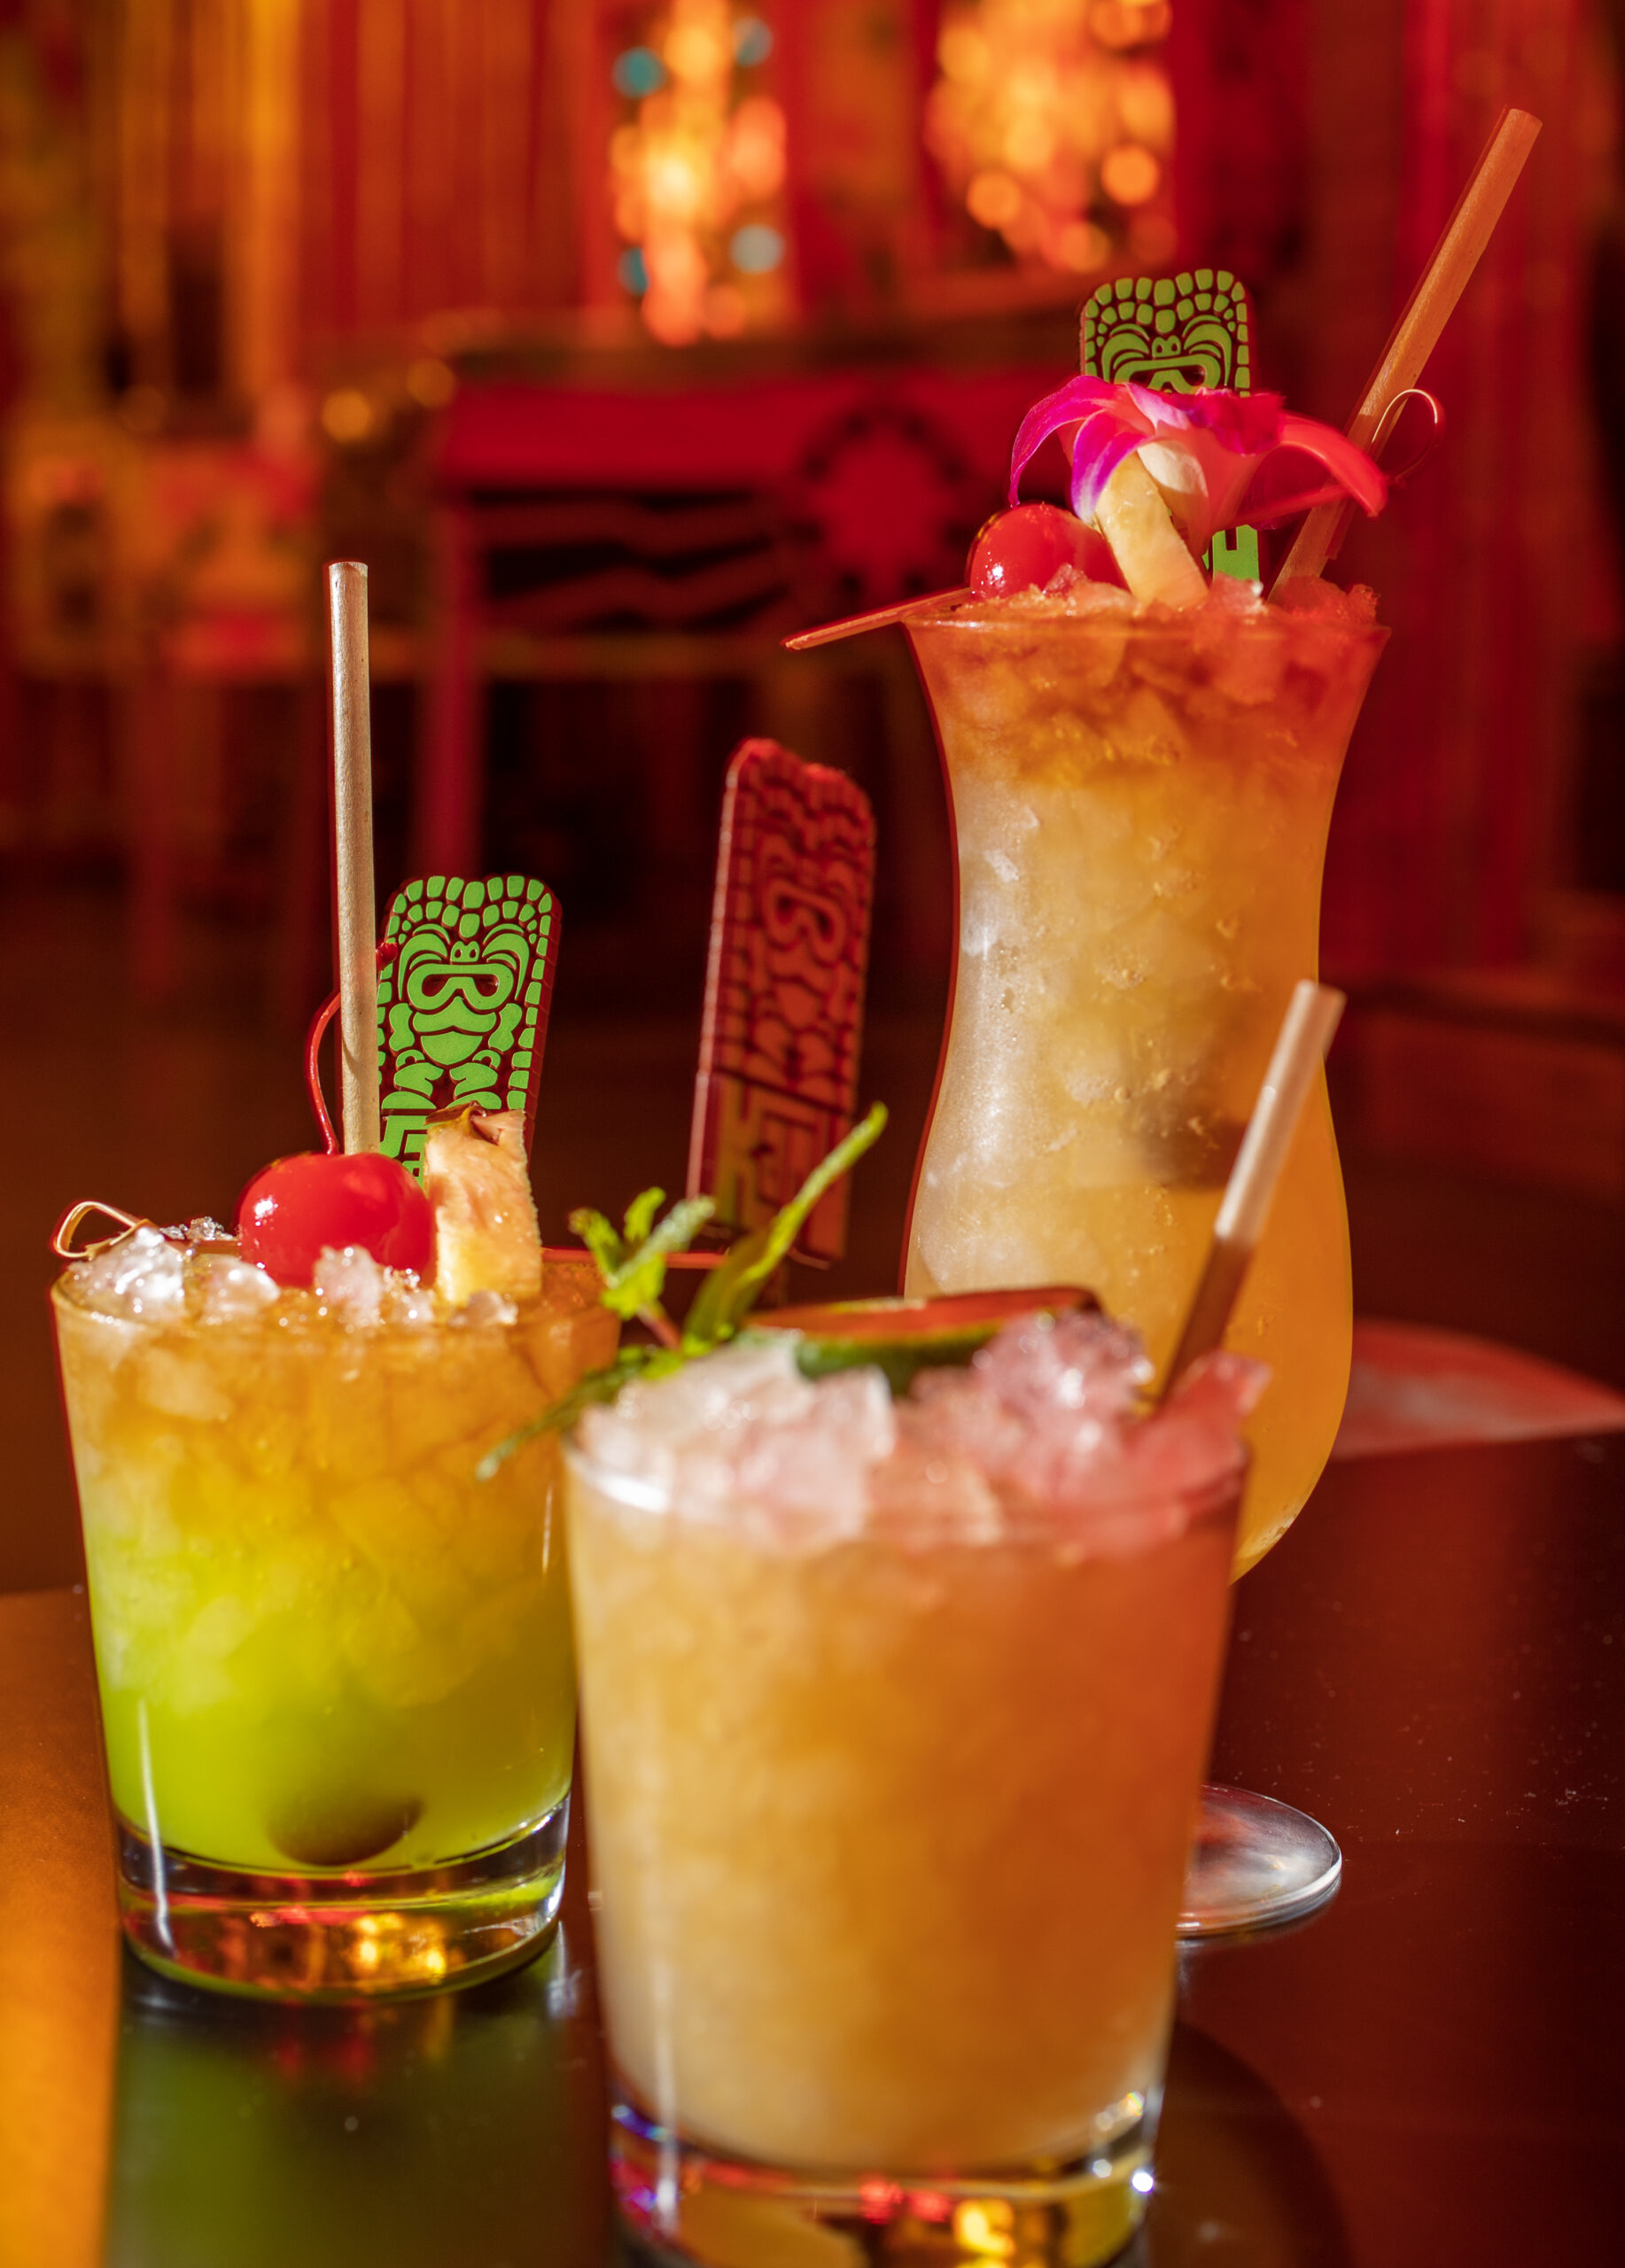 From Left, Fink Bomb, Classic Mai Tai and the Tropical Itch at Kapu Bar, tiki bar and restaurant in the heart of downtown Petaluma on Keller street February 1, 2023 (Chad Surmick / The Press Democrat)